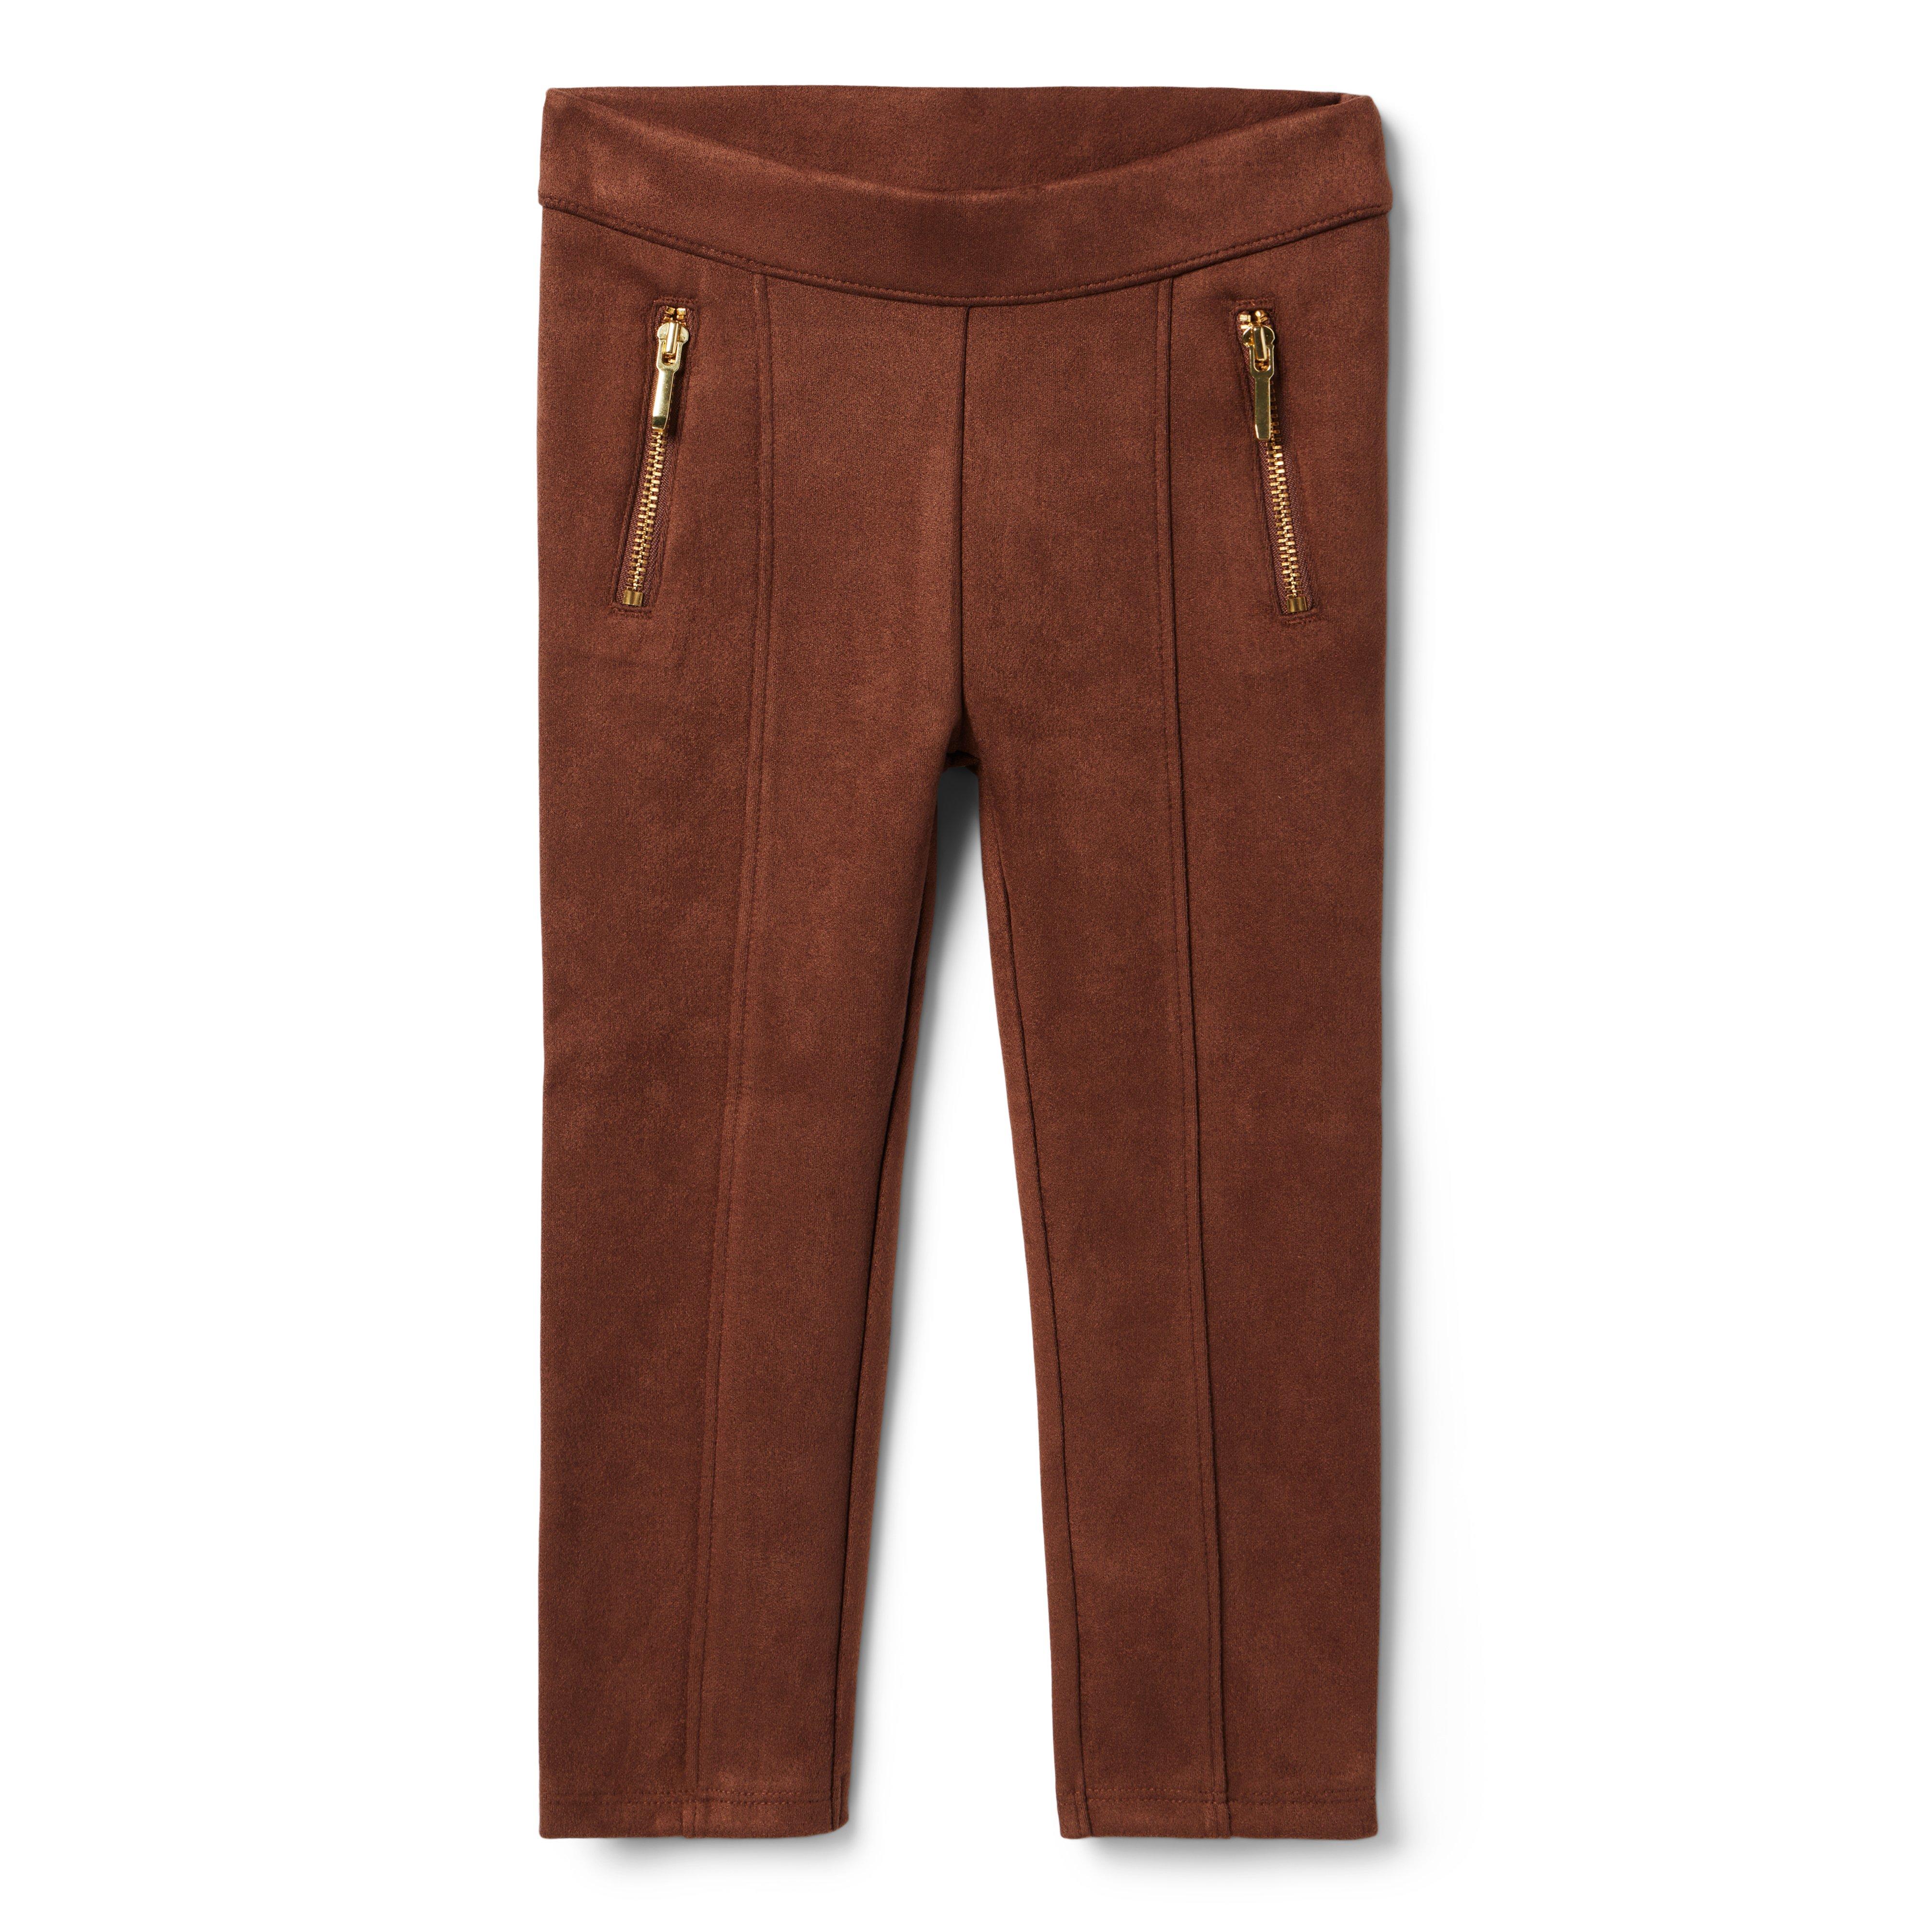 The Sueded City Pant